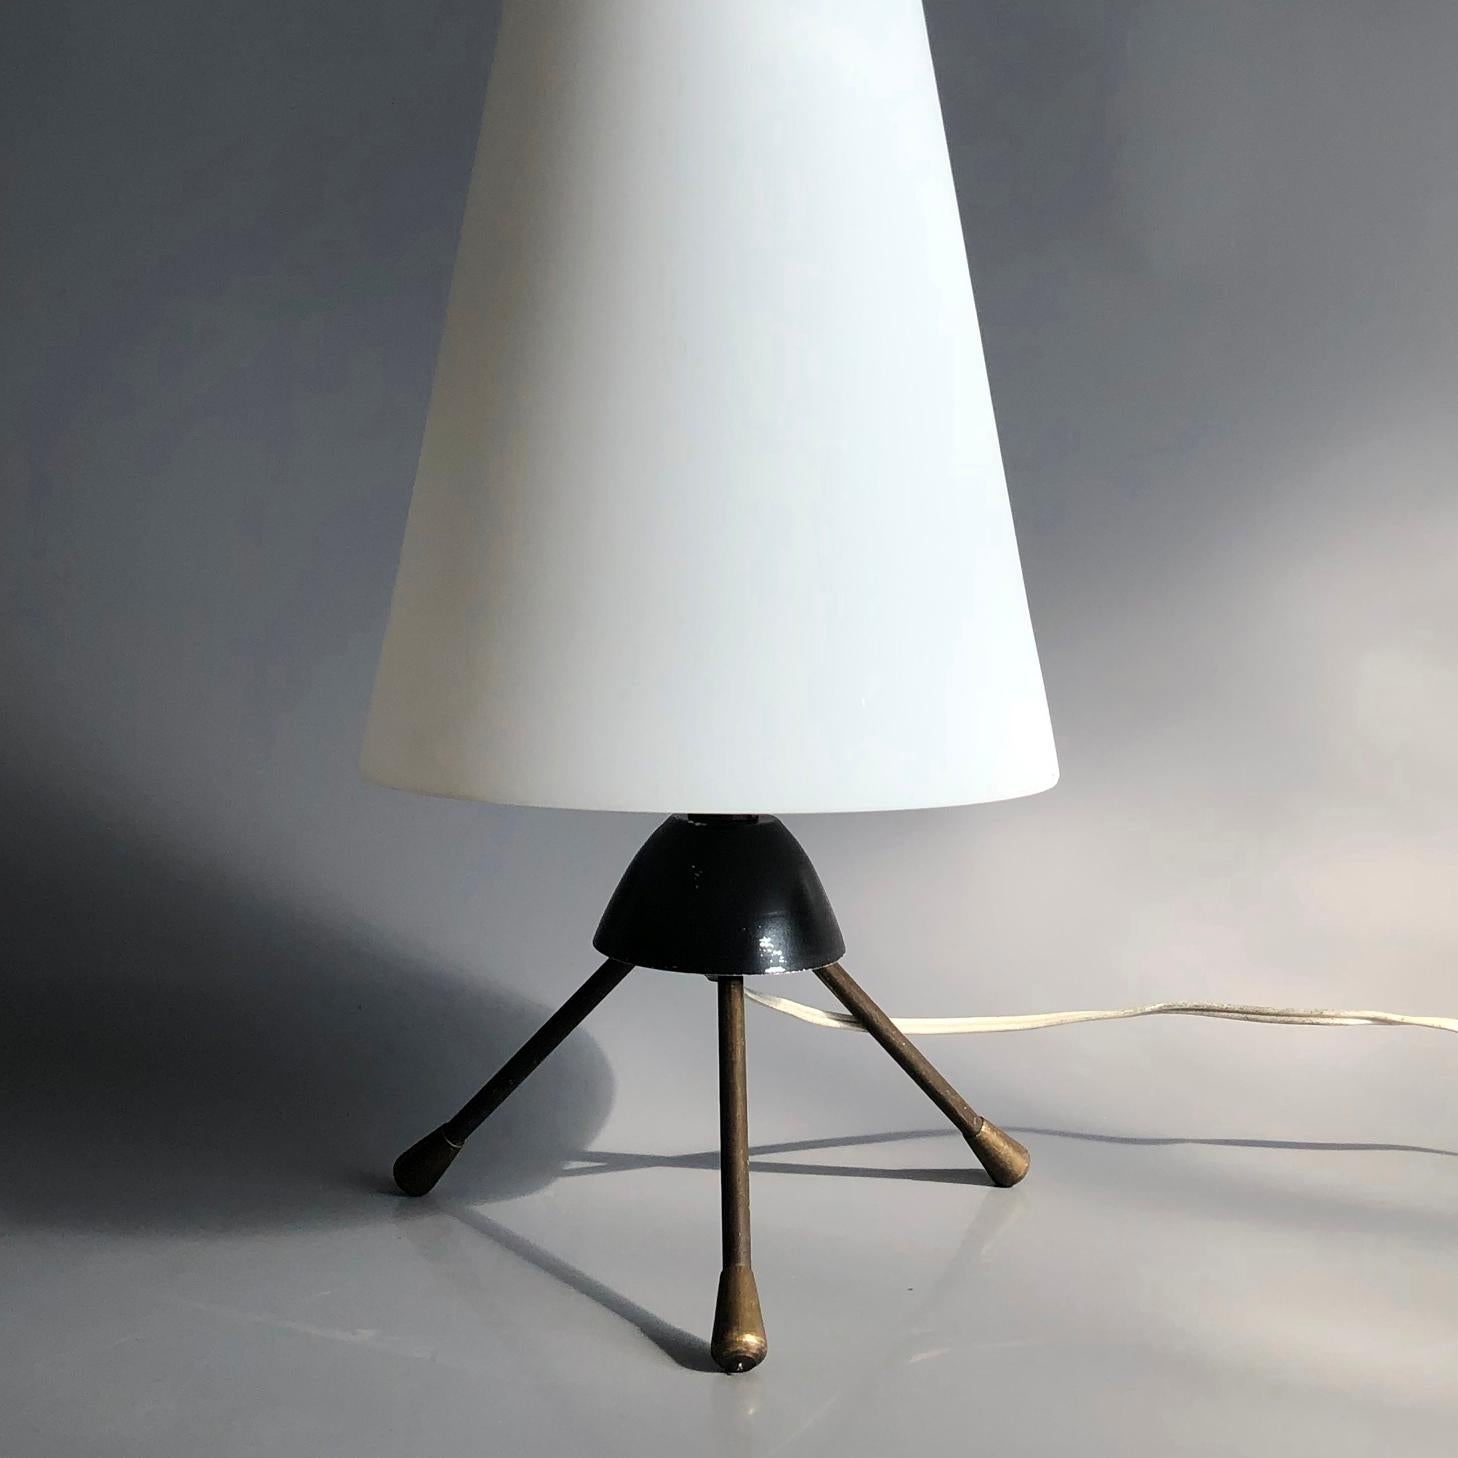 Space Age Modernist Conical Table Lamp, Italy, 1960s For Sale 5